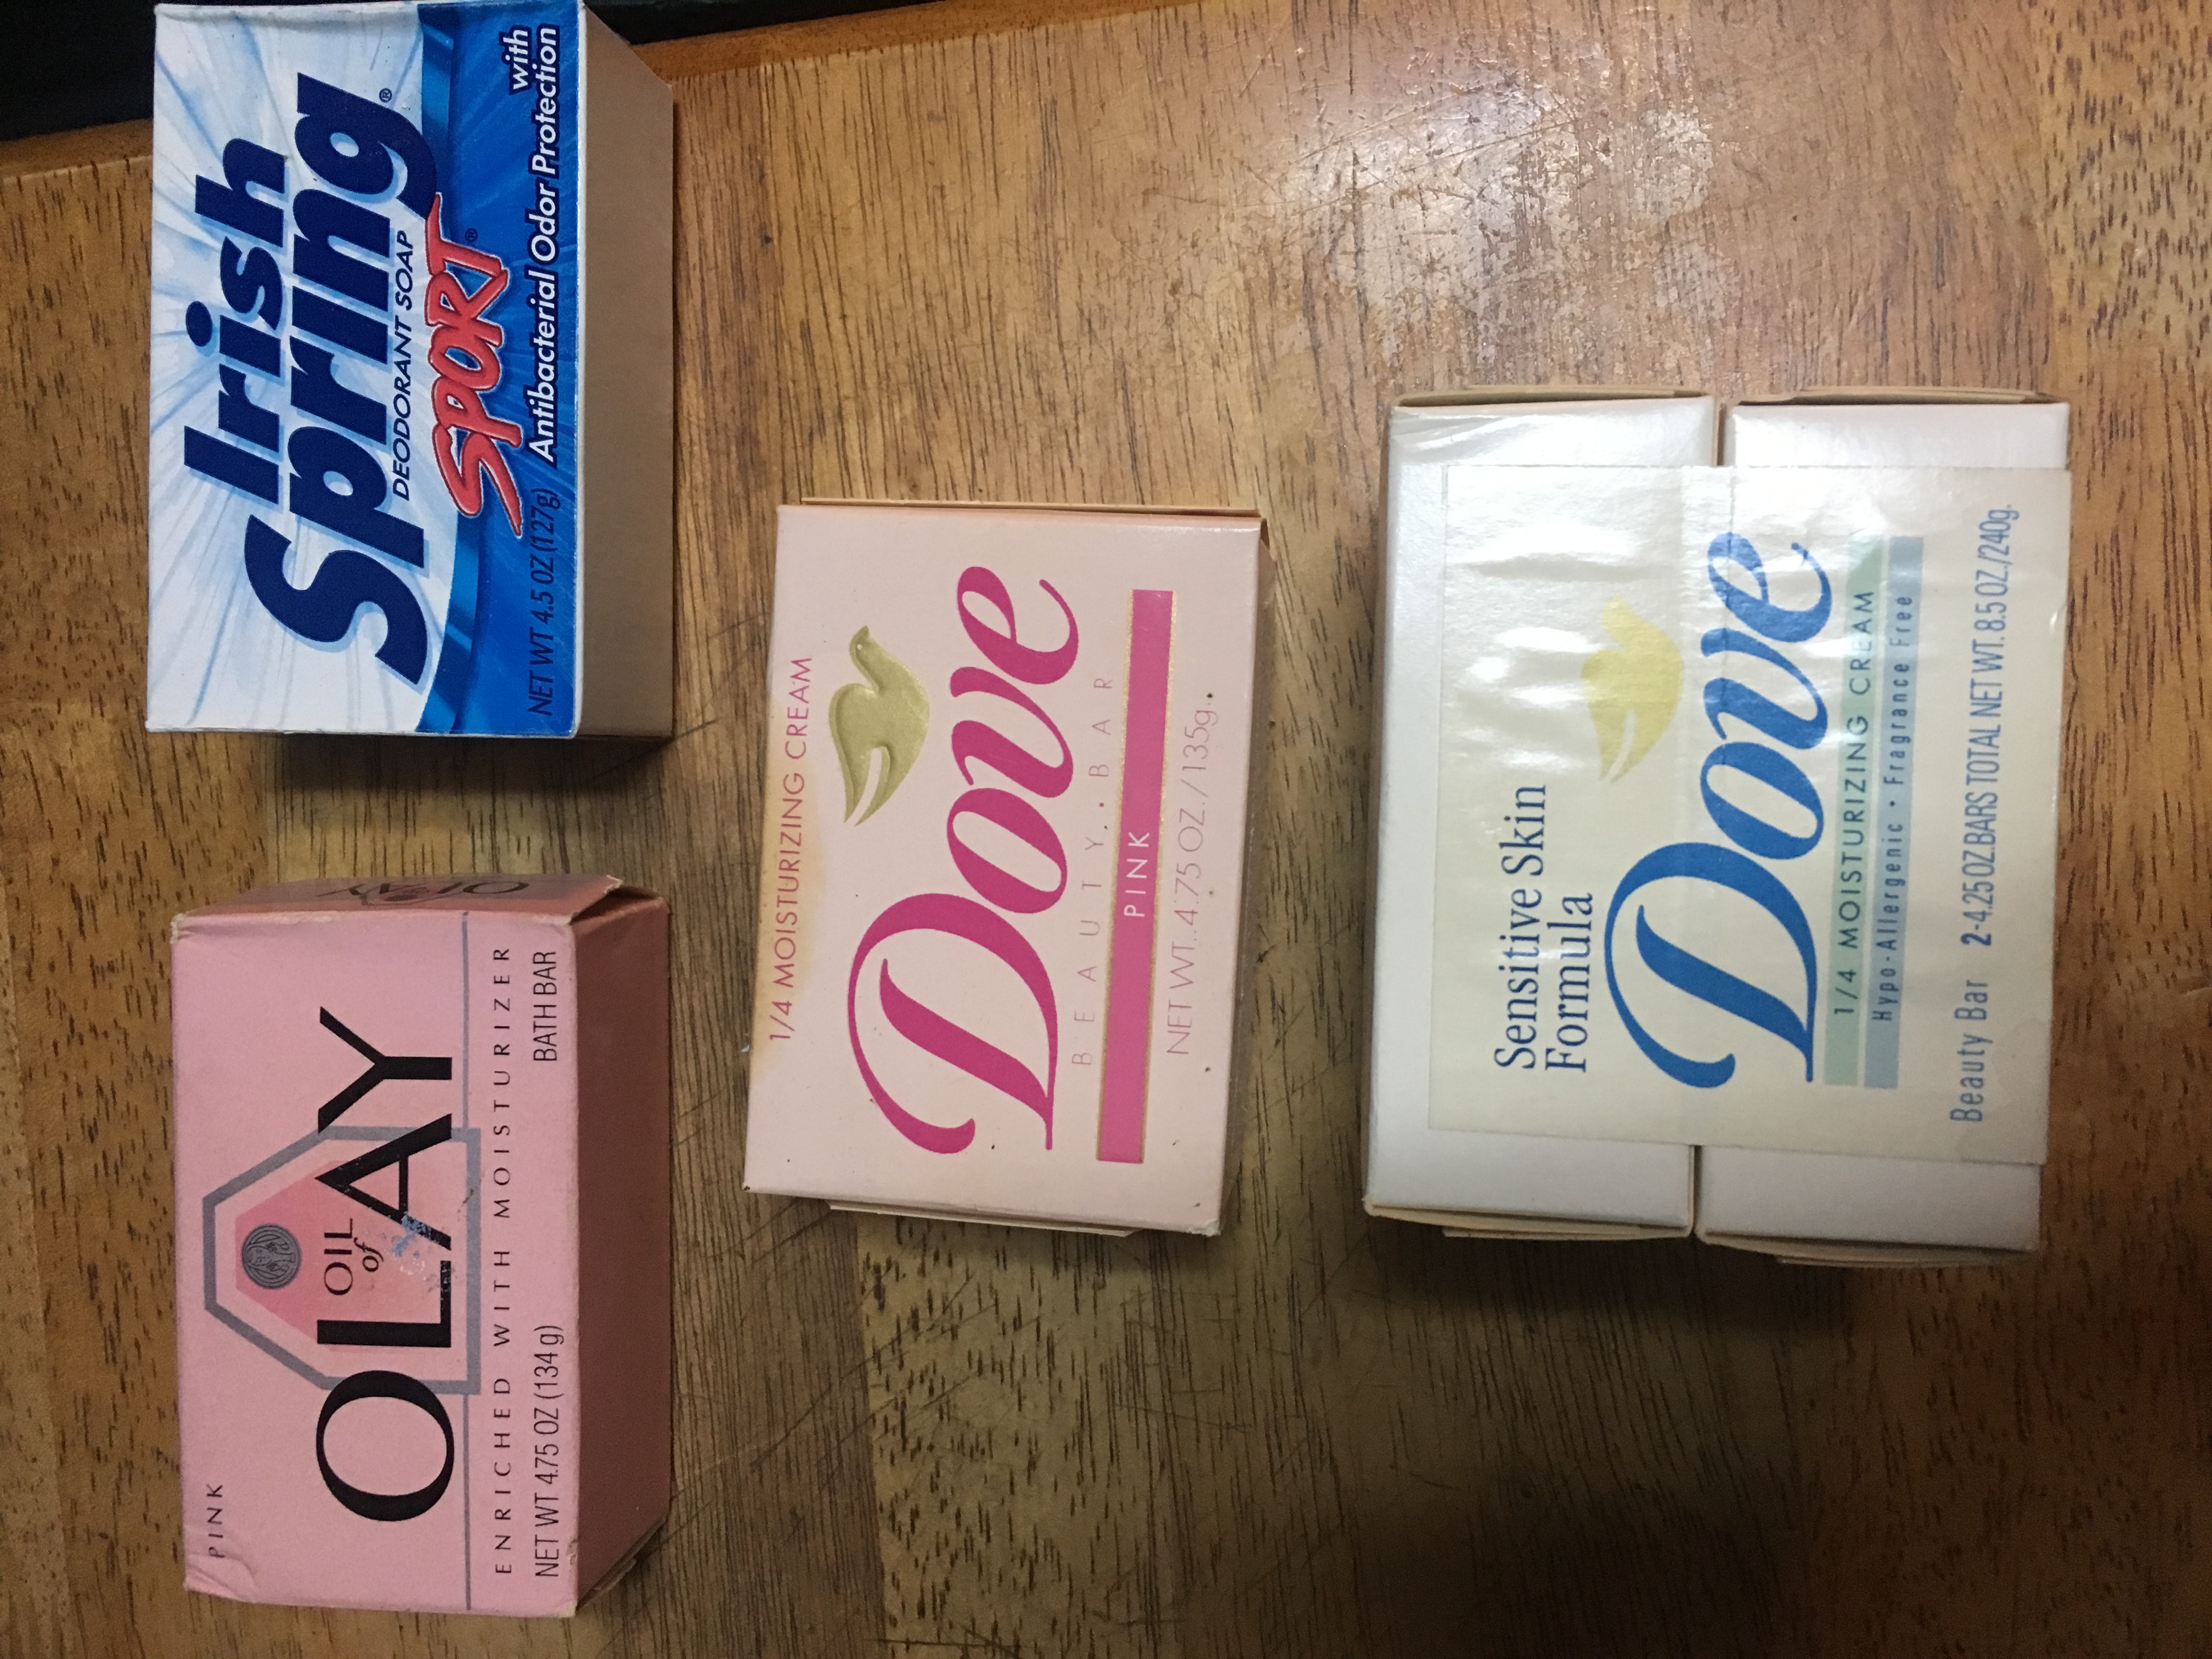 The old packaging of brands you use now